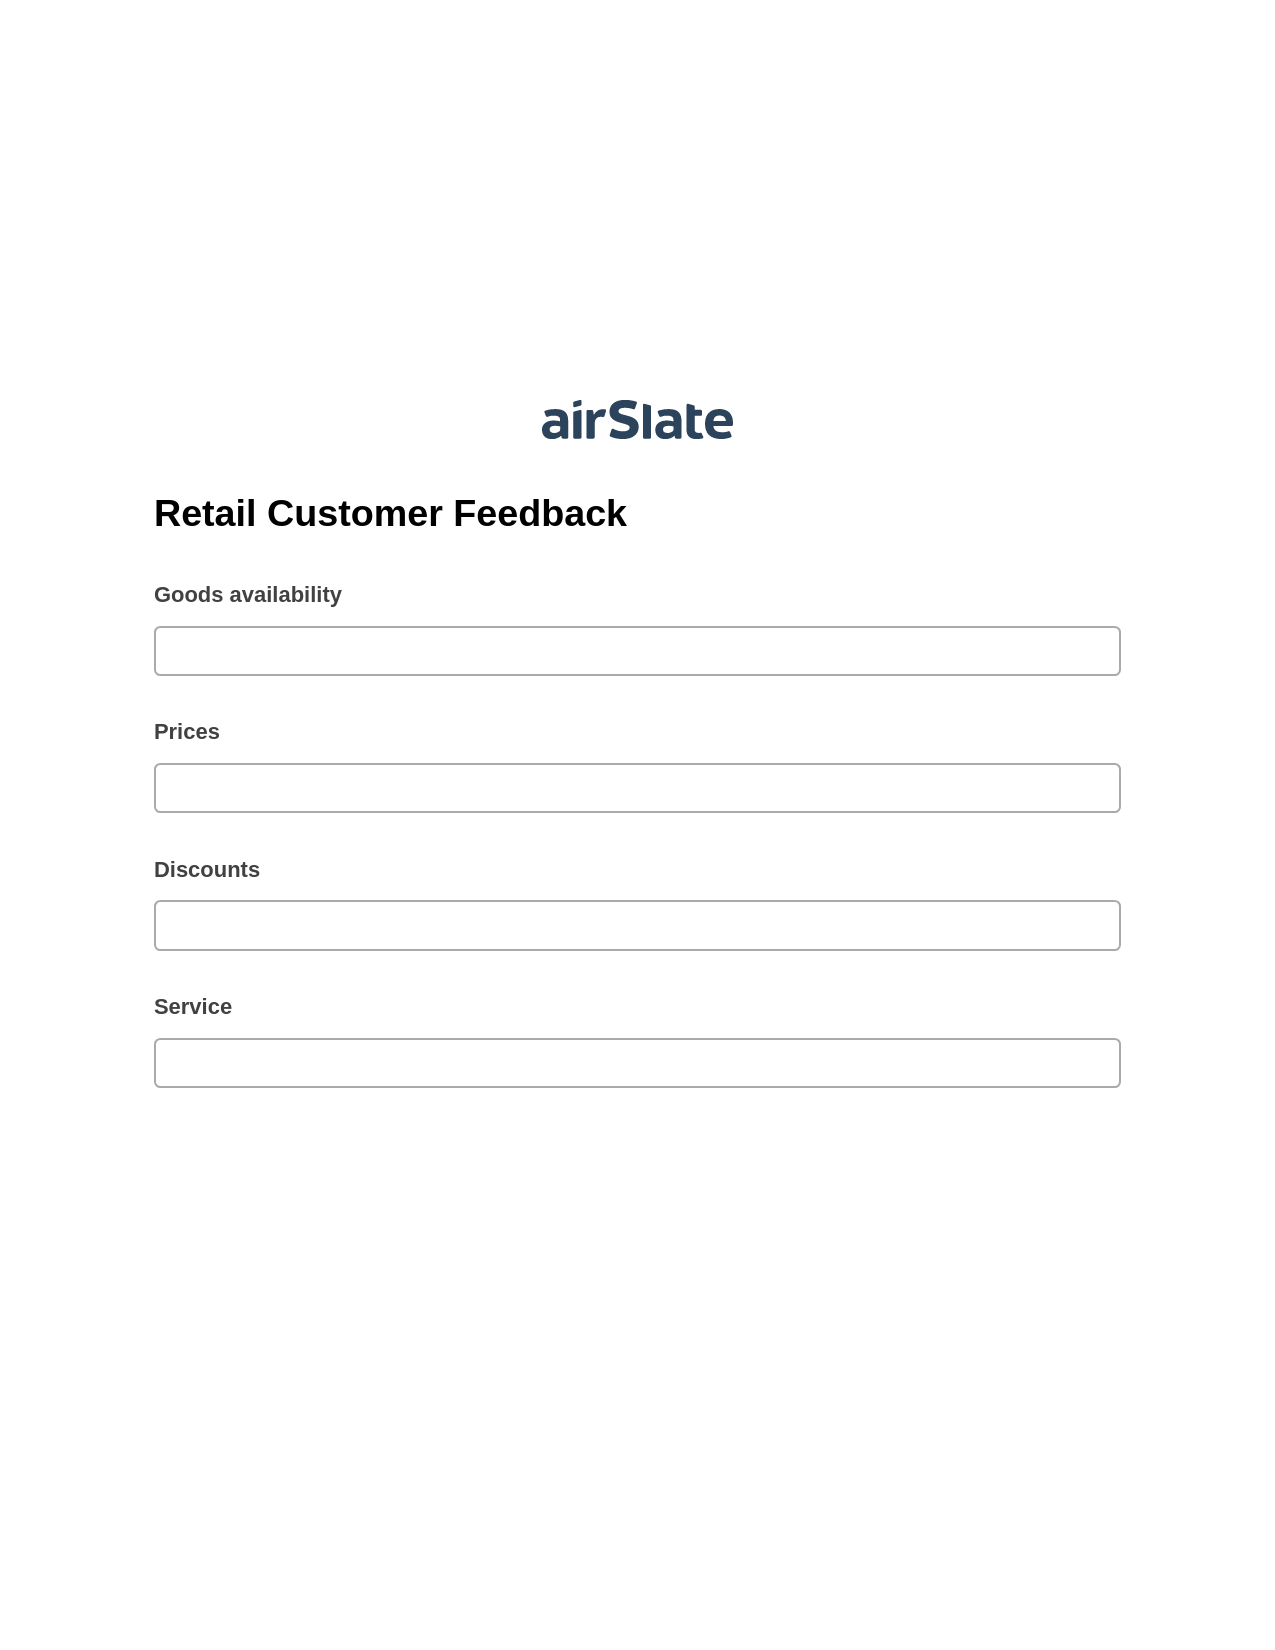 Multirole Retail Customer Feedback Pre-fill Slate from MS Dynamics 365 Records Bot, Google Sheet Two-Way Binding Bot, Archive to SharePoint Folder Bot